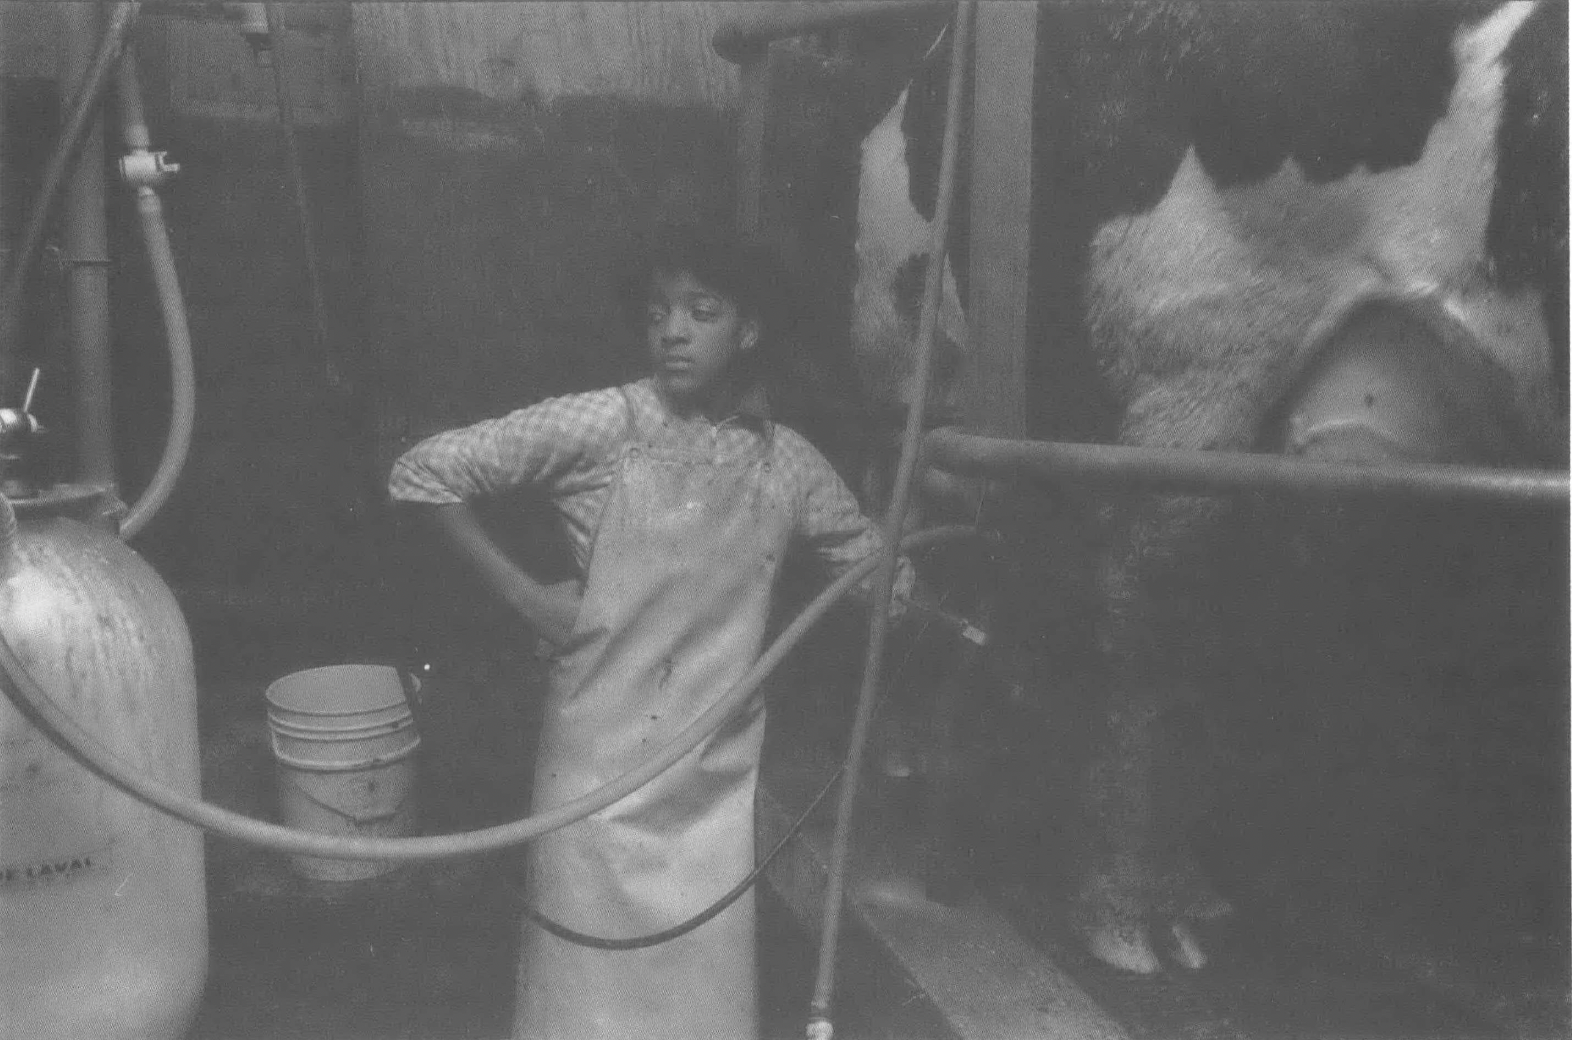 Child working in industrial room 